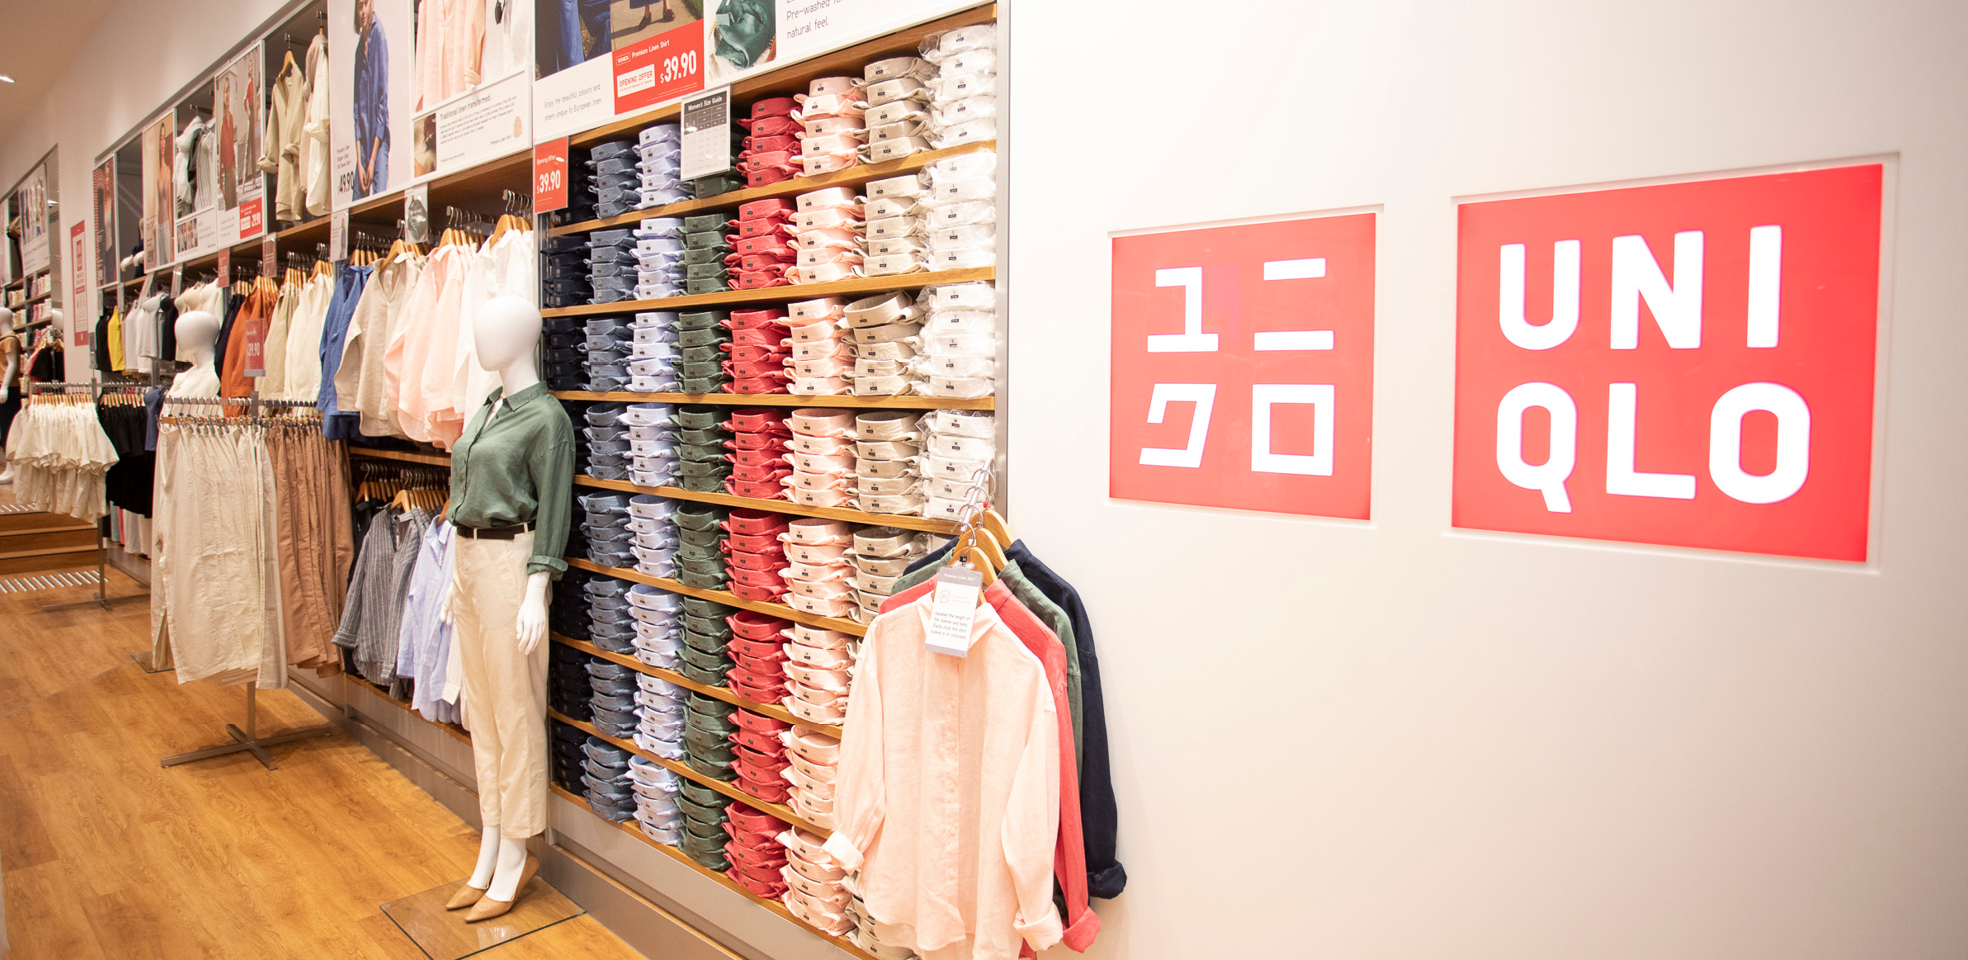 UNIQLO Digitalization and SupplyChain Transformation  Technology and  Operations Management